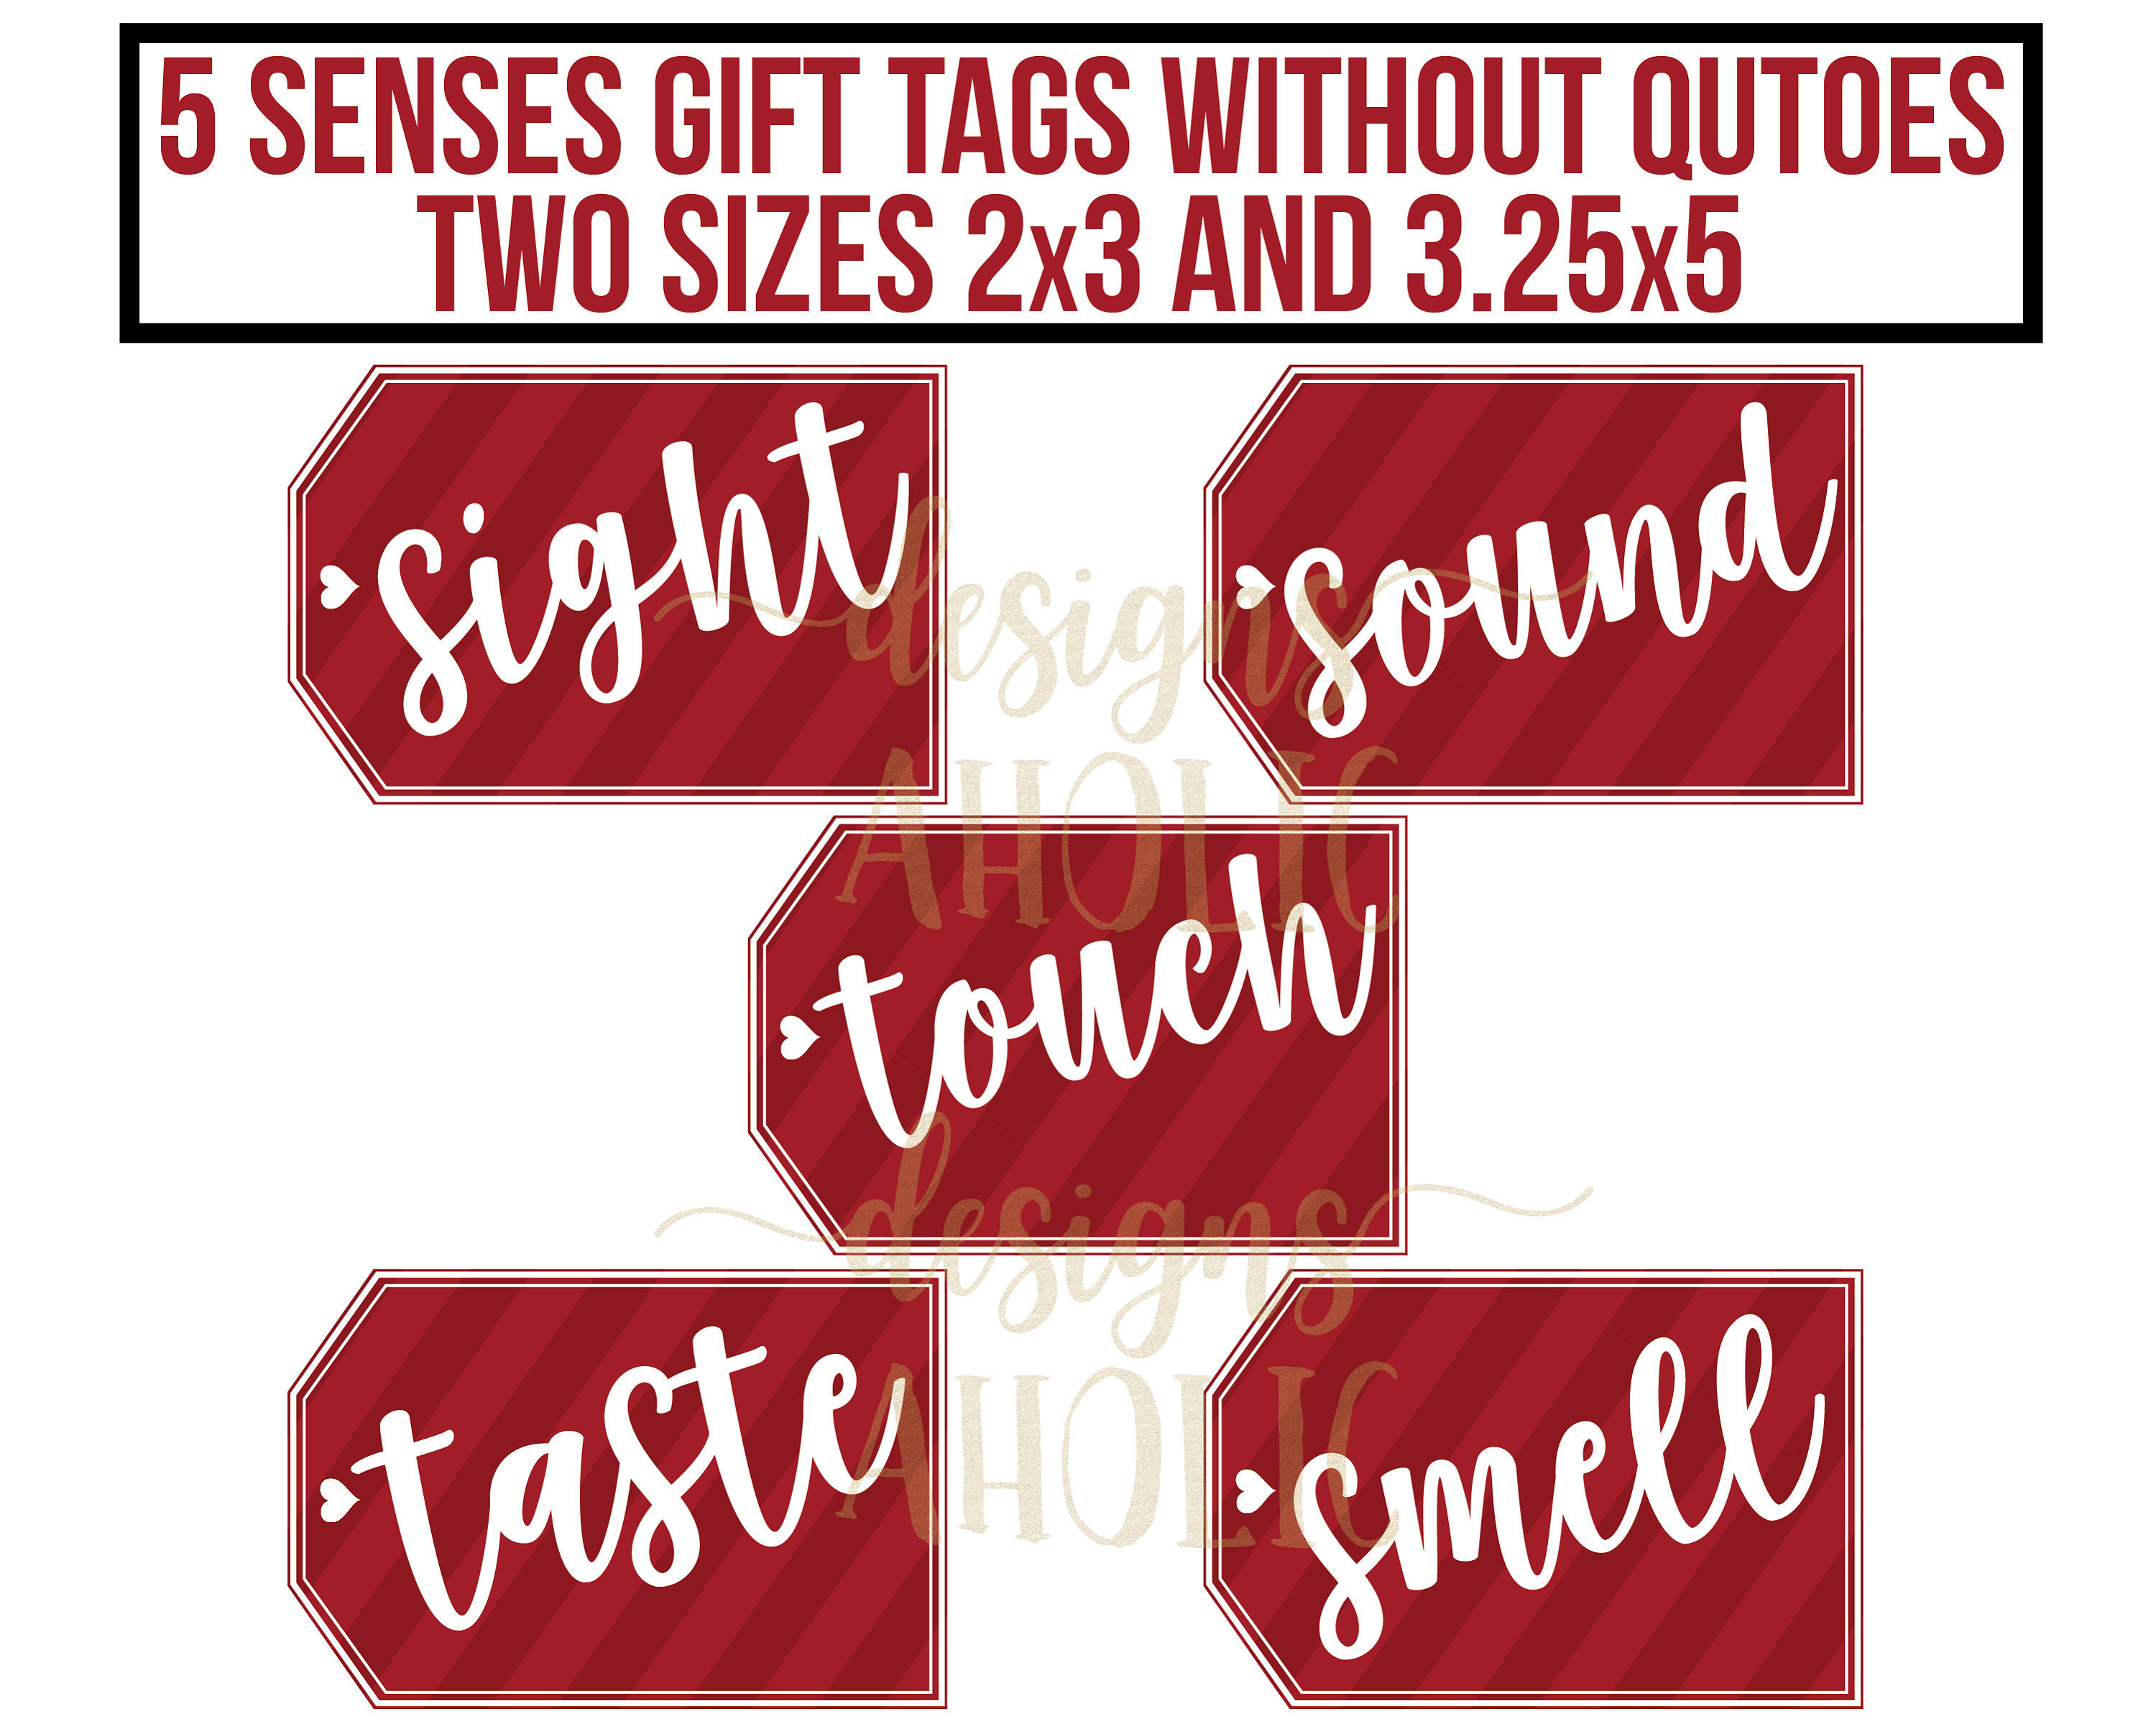 5 Senses Gift Ideas Your Man Would Be Excited To Get  5 sense gift,  Boyfriend gift basket, Gift baskets for him